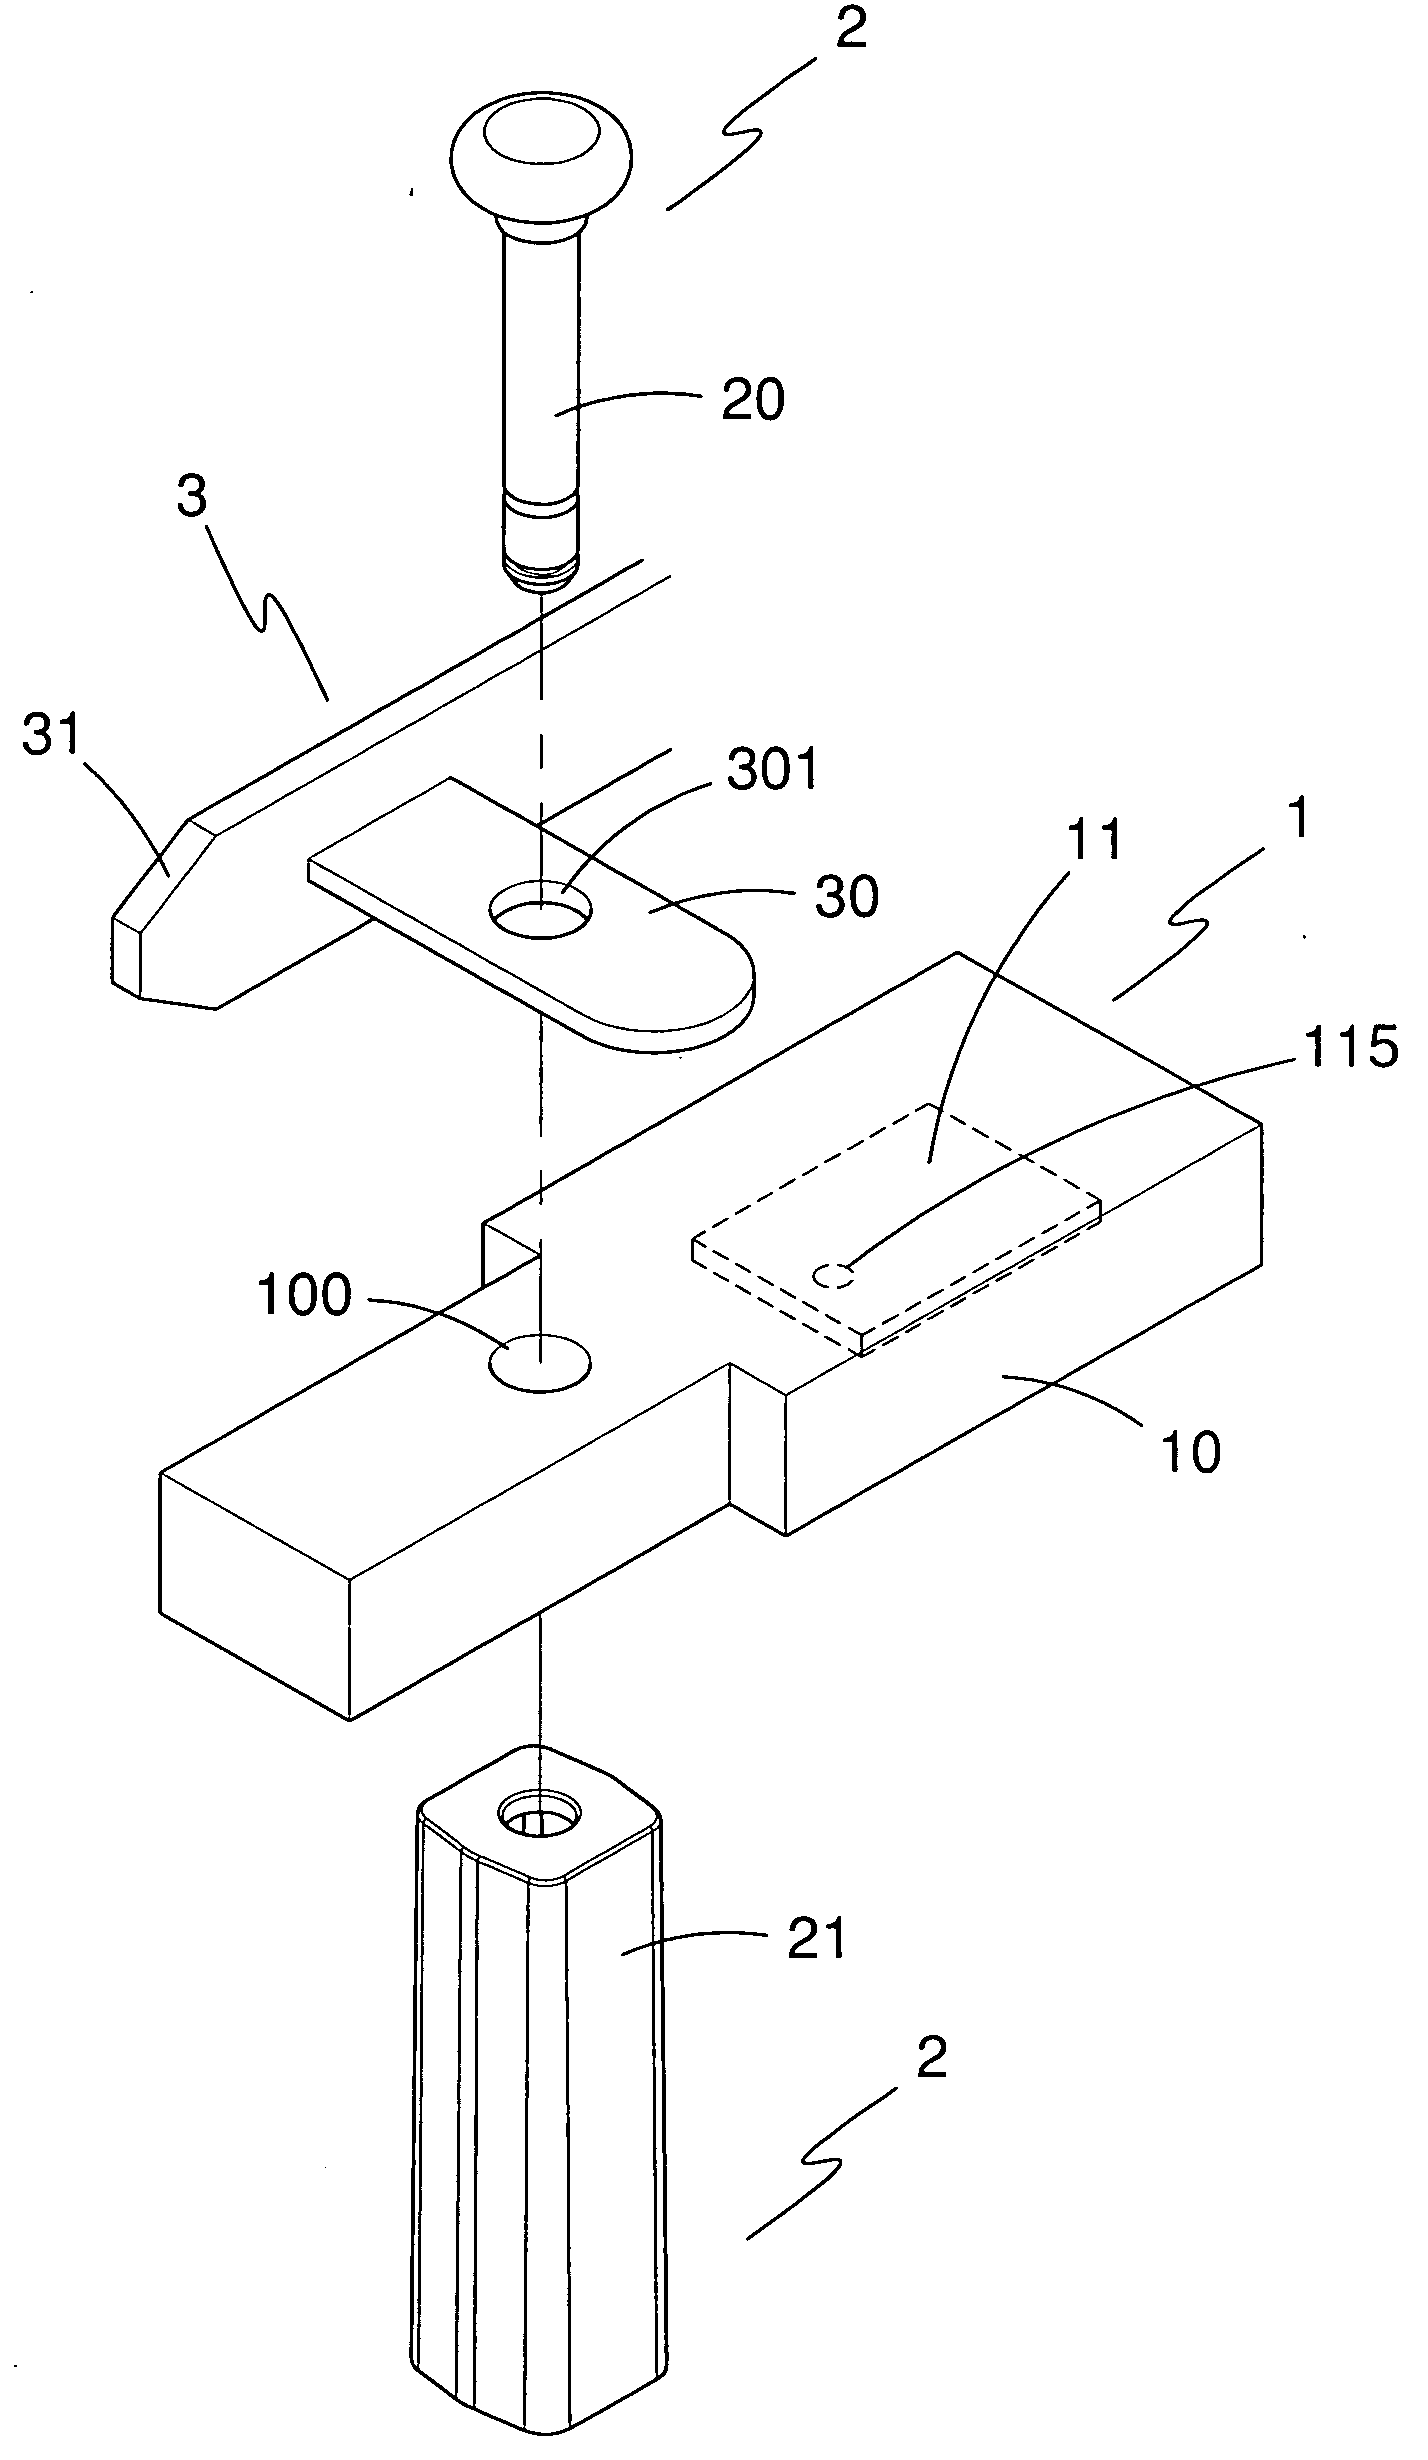 System for monitoring containers with seals